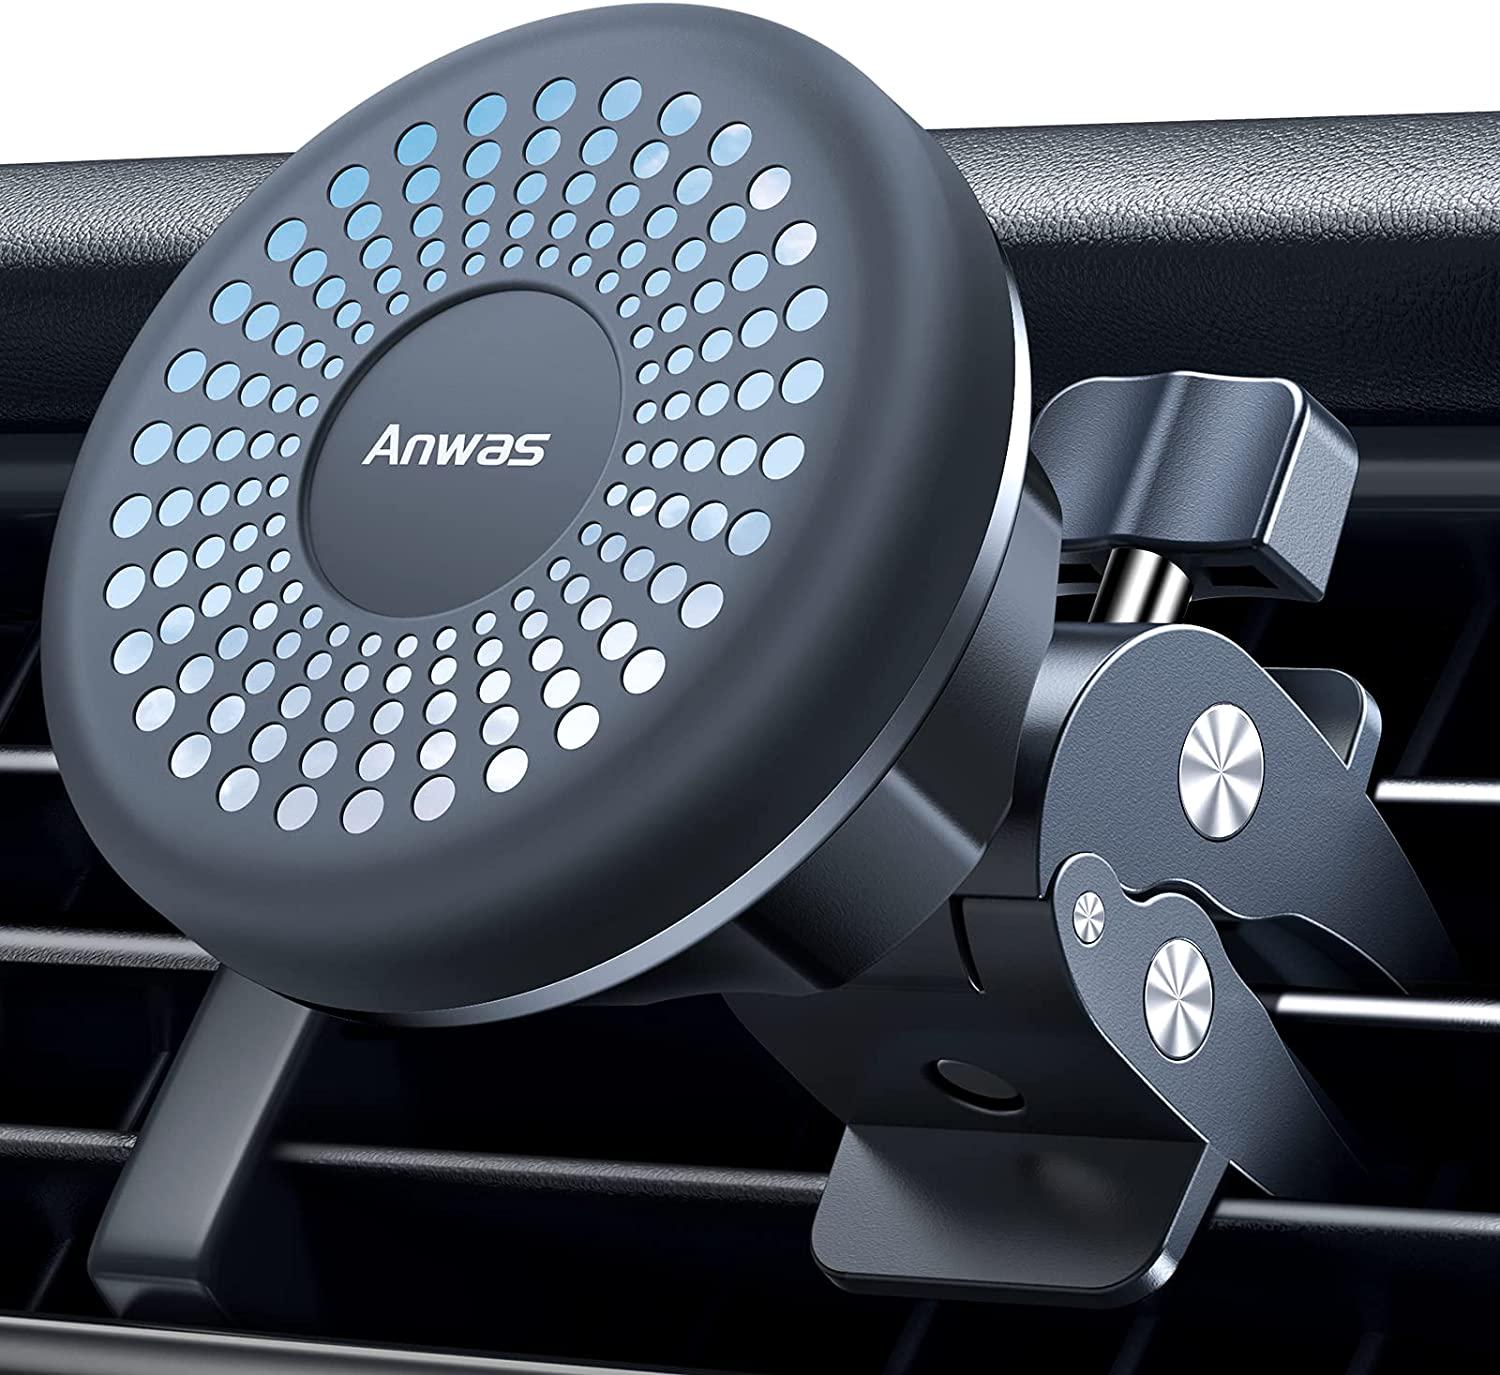 Anwas, Magnetic Phone Holder for Car, [Bionic Alligator Clip] Anwas Universal Strong Car Vent Phone Mount, [6 Strong N52 Magnets] Cell Phone Holder Compatible with iPhone Samsung LG Google Pixel, etc